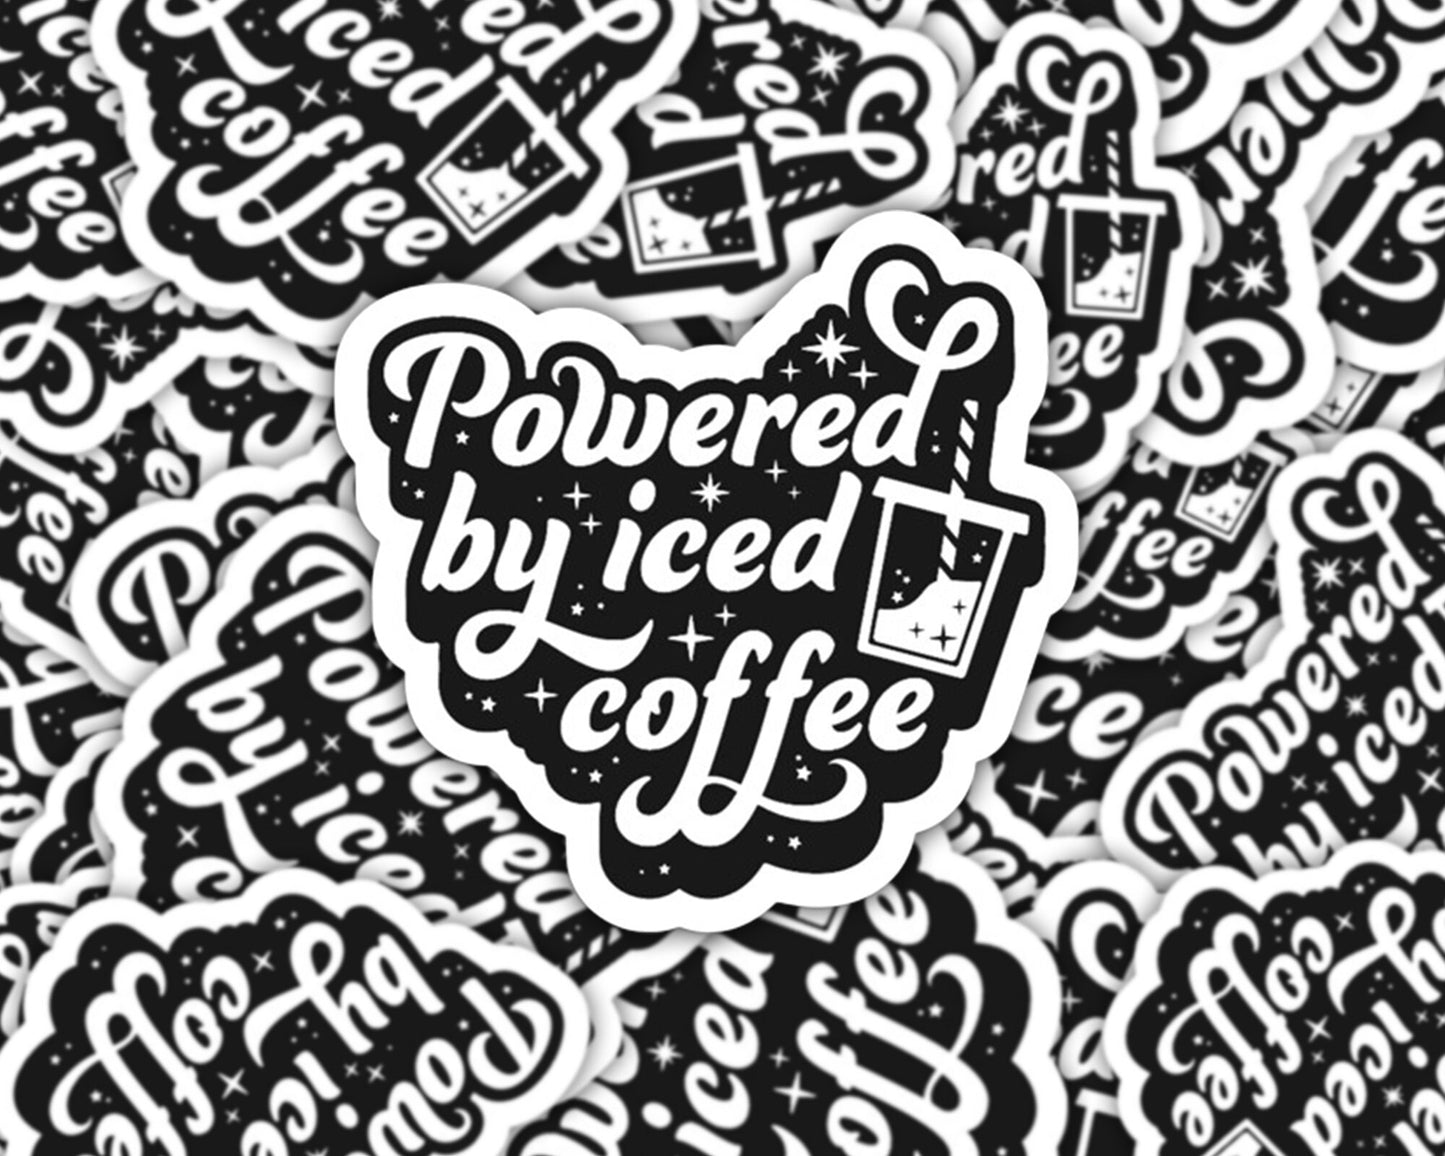 powered by iced coffee sticker, gifts for coffee lovers, coffee gifts, iced coffee sticker, coffee lover sticker, coffee addict, cafe latte